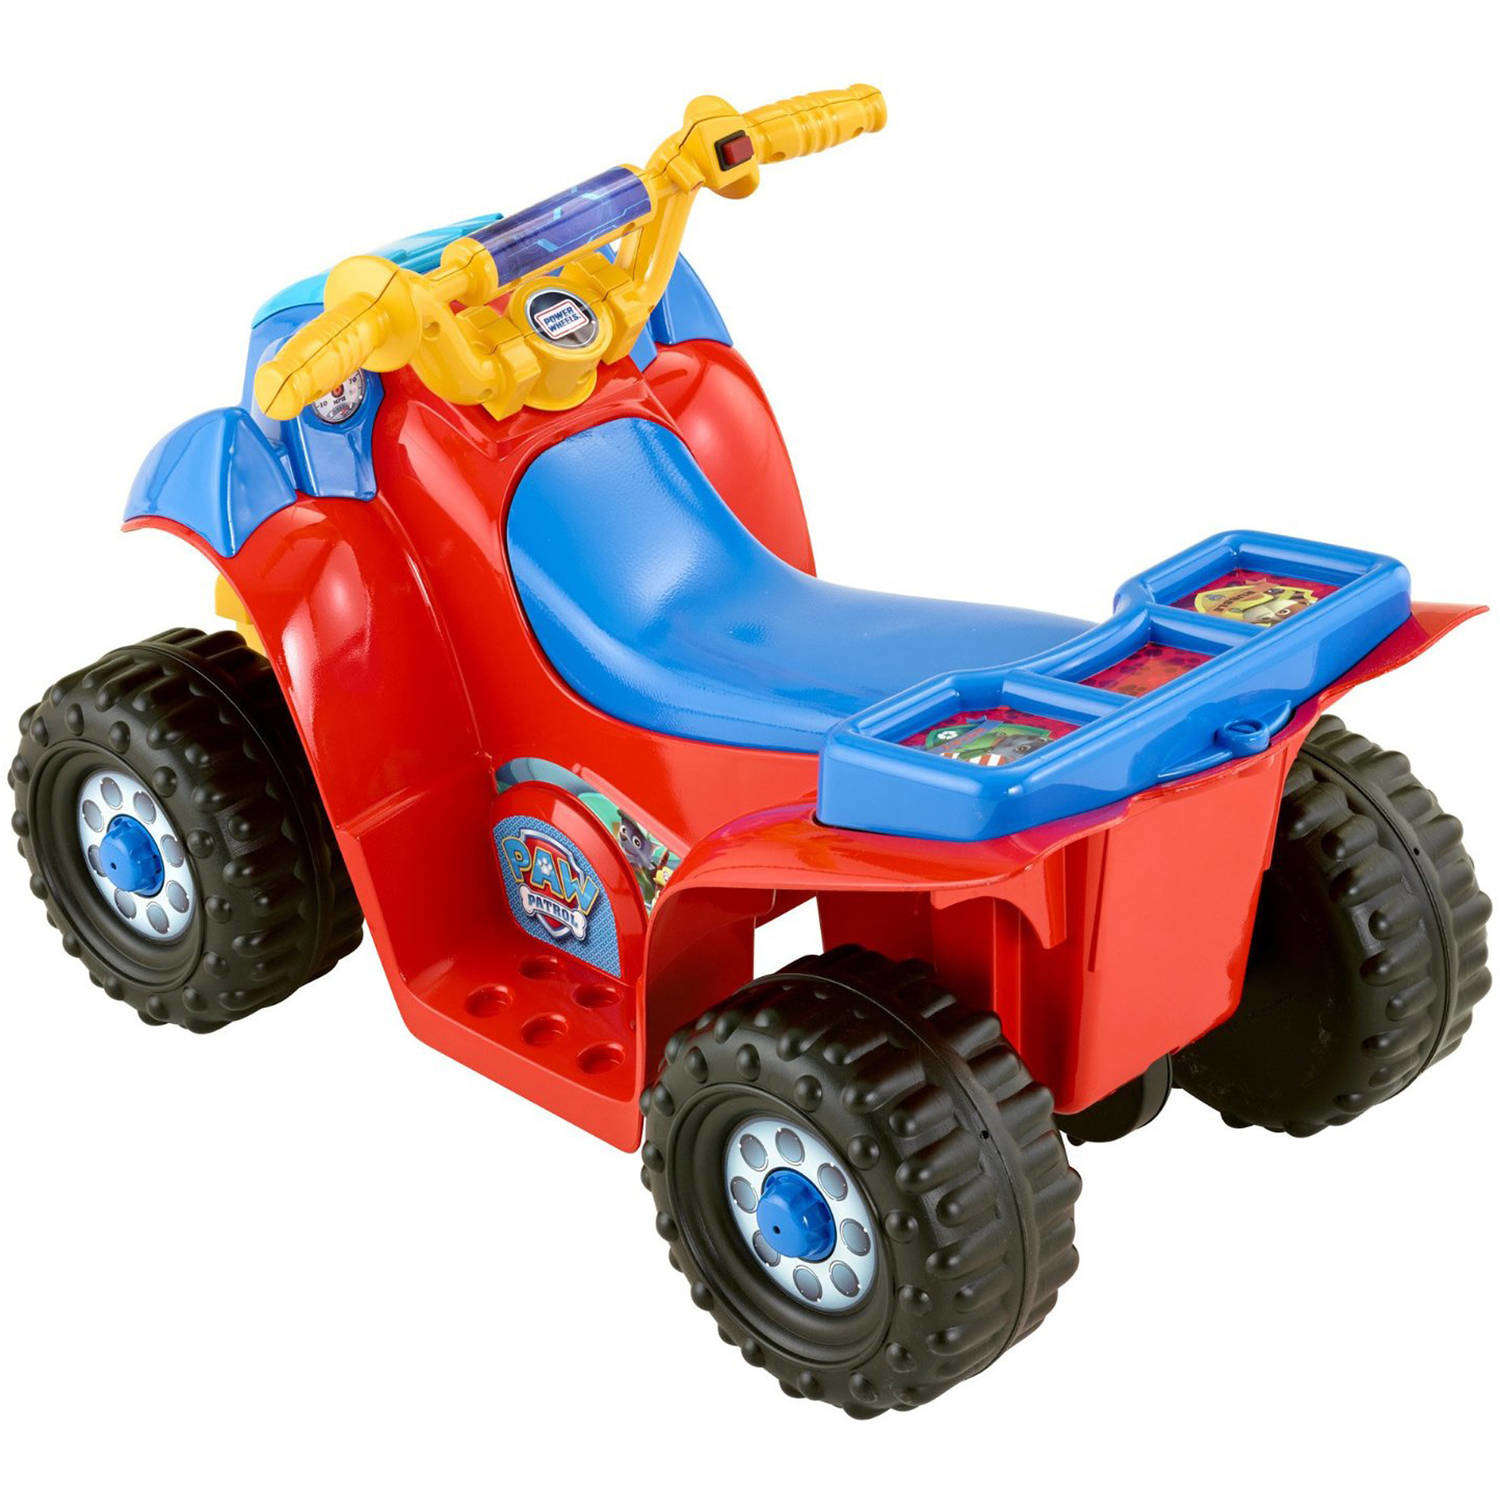 Power Wheels PAW Patrol Lil' Quad 6-Volt Battery-Powered Vehicle - image 5 of 9